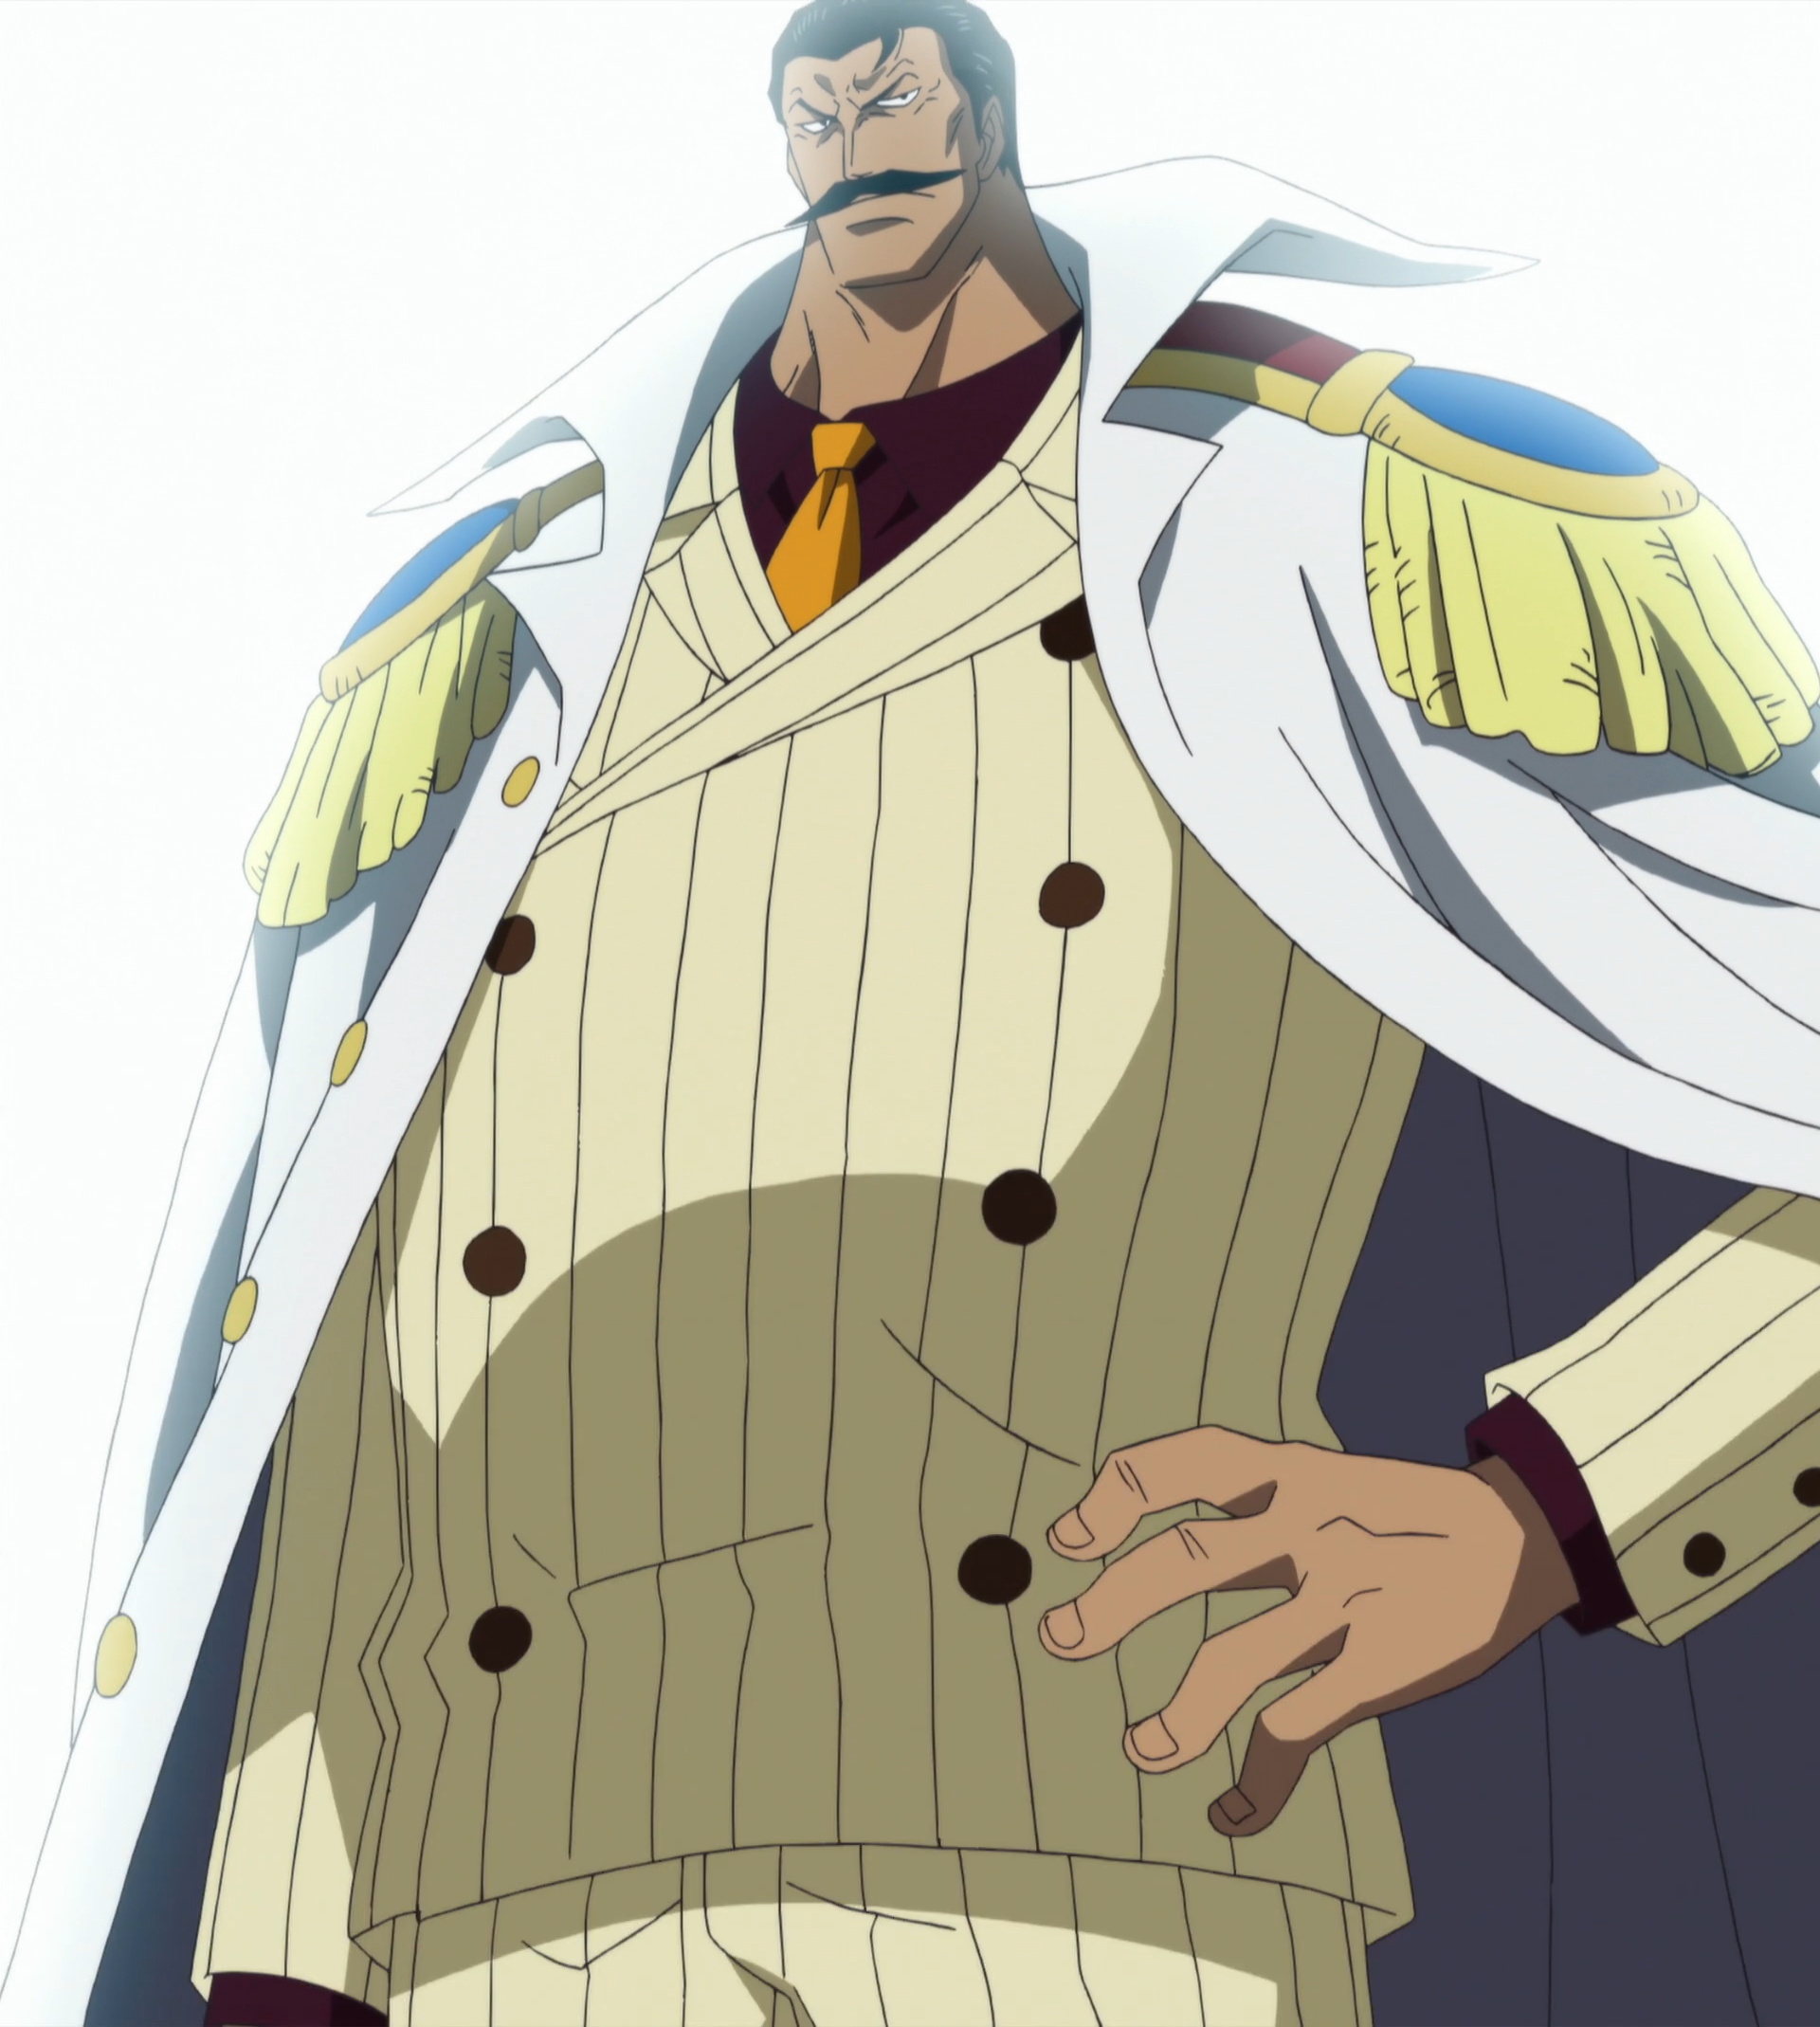 https://static.wikia.nocookie.net/onepiece/images/0/09/Stainless_Anime_Infobox.png/revision/latest?cb=20221101021425